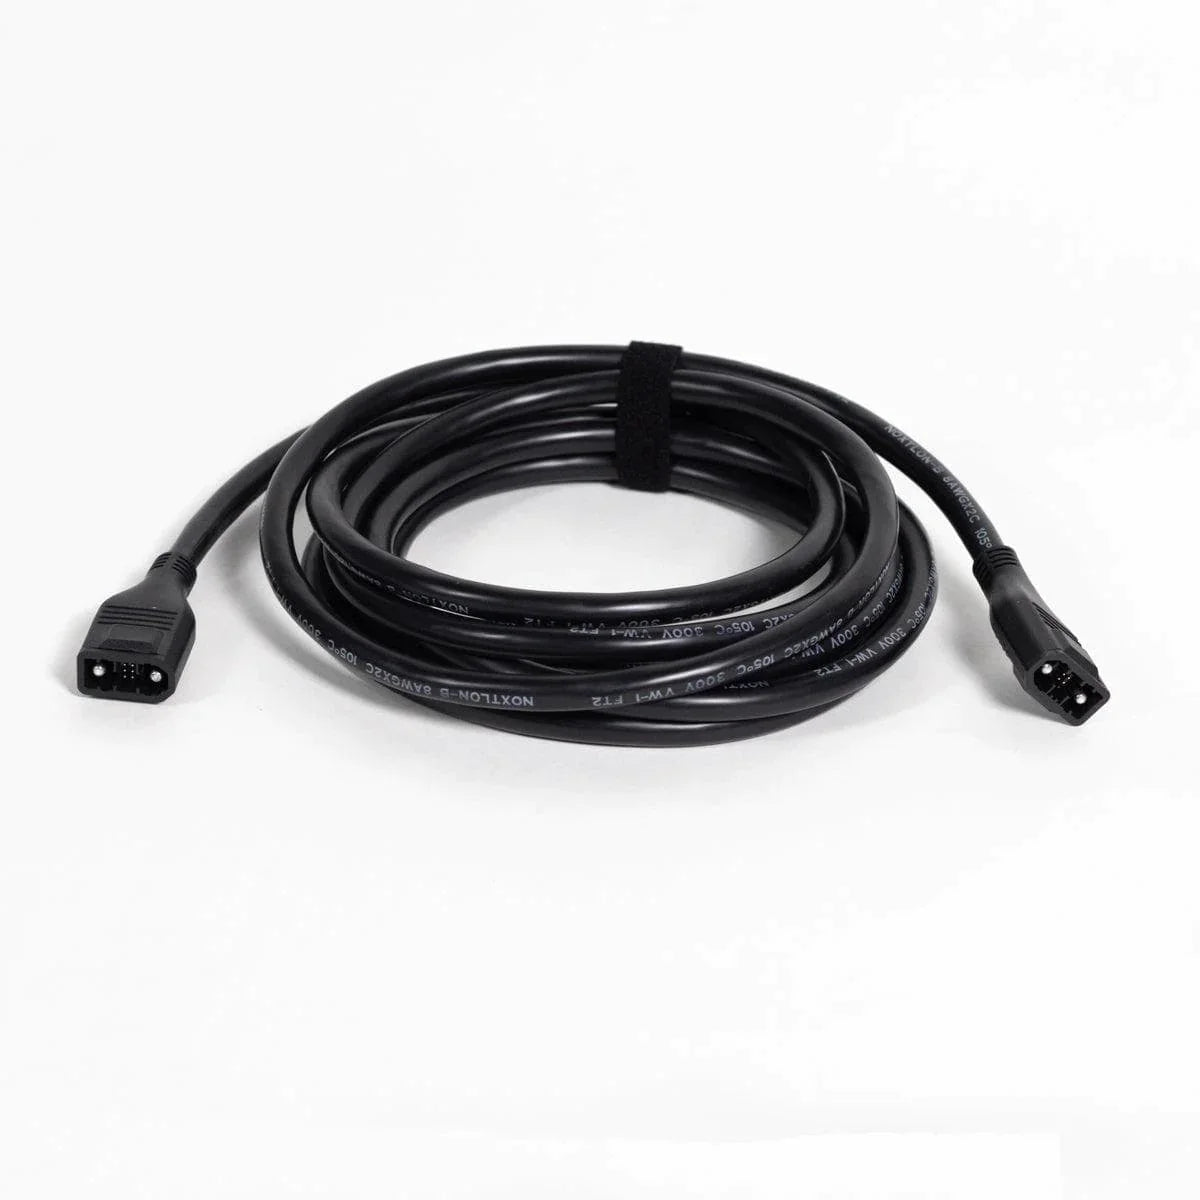 EcoFlow Extra Battery Cable (5m) - New Star Living